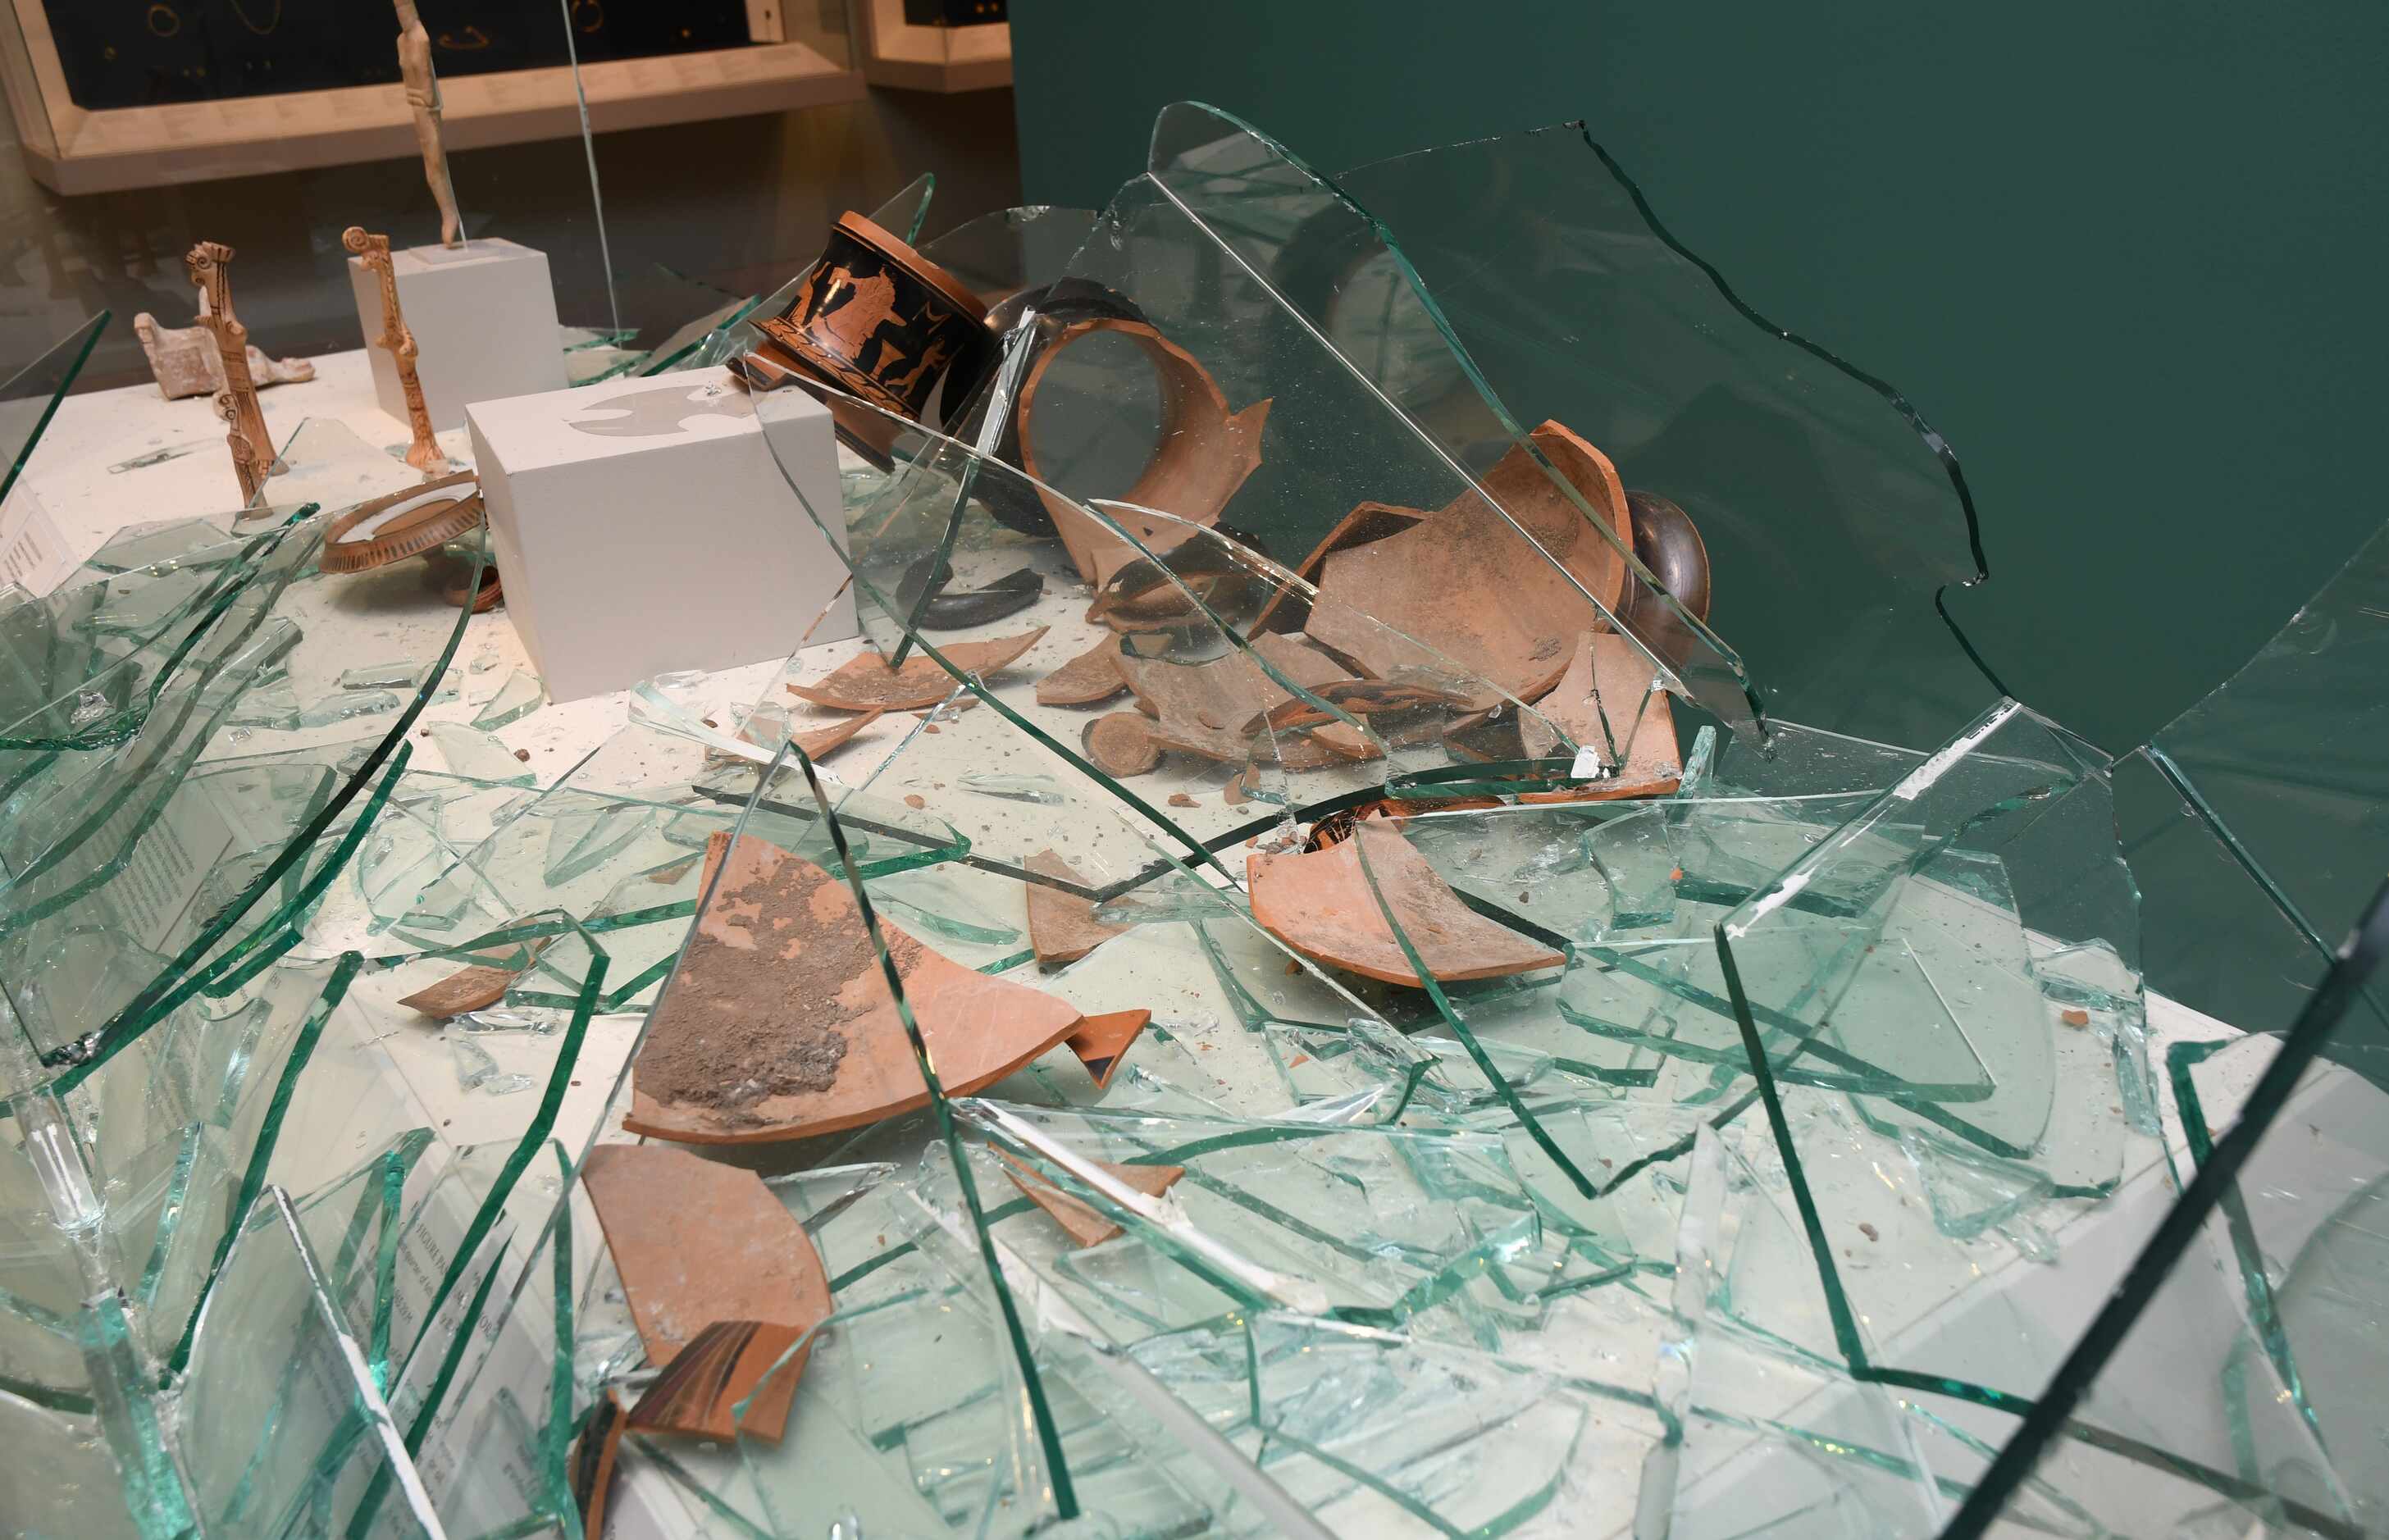 Shards of the amphora Hernandez allegedly broke are shown scattered across a display case.
